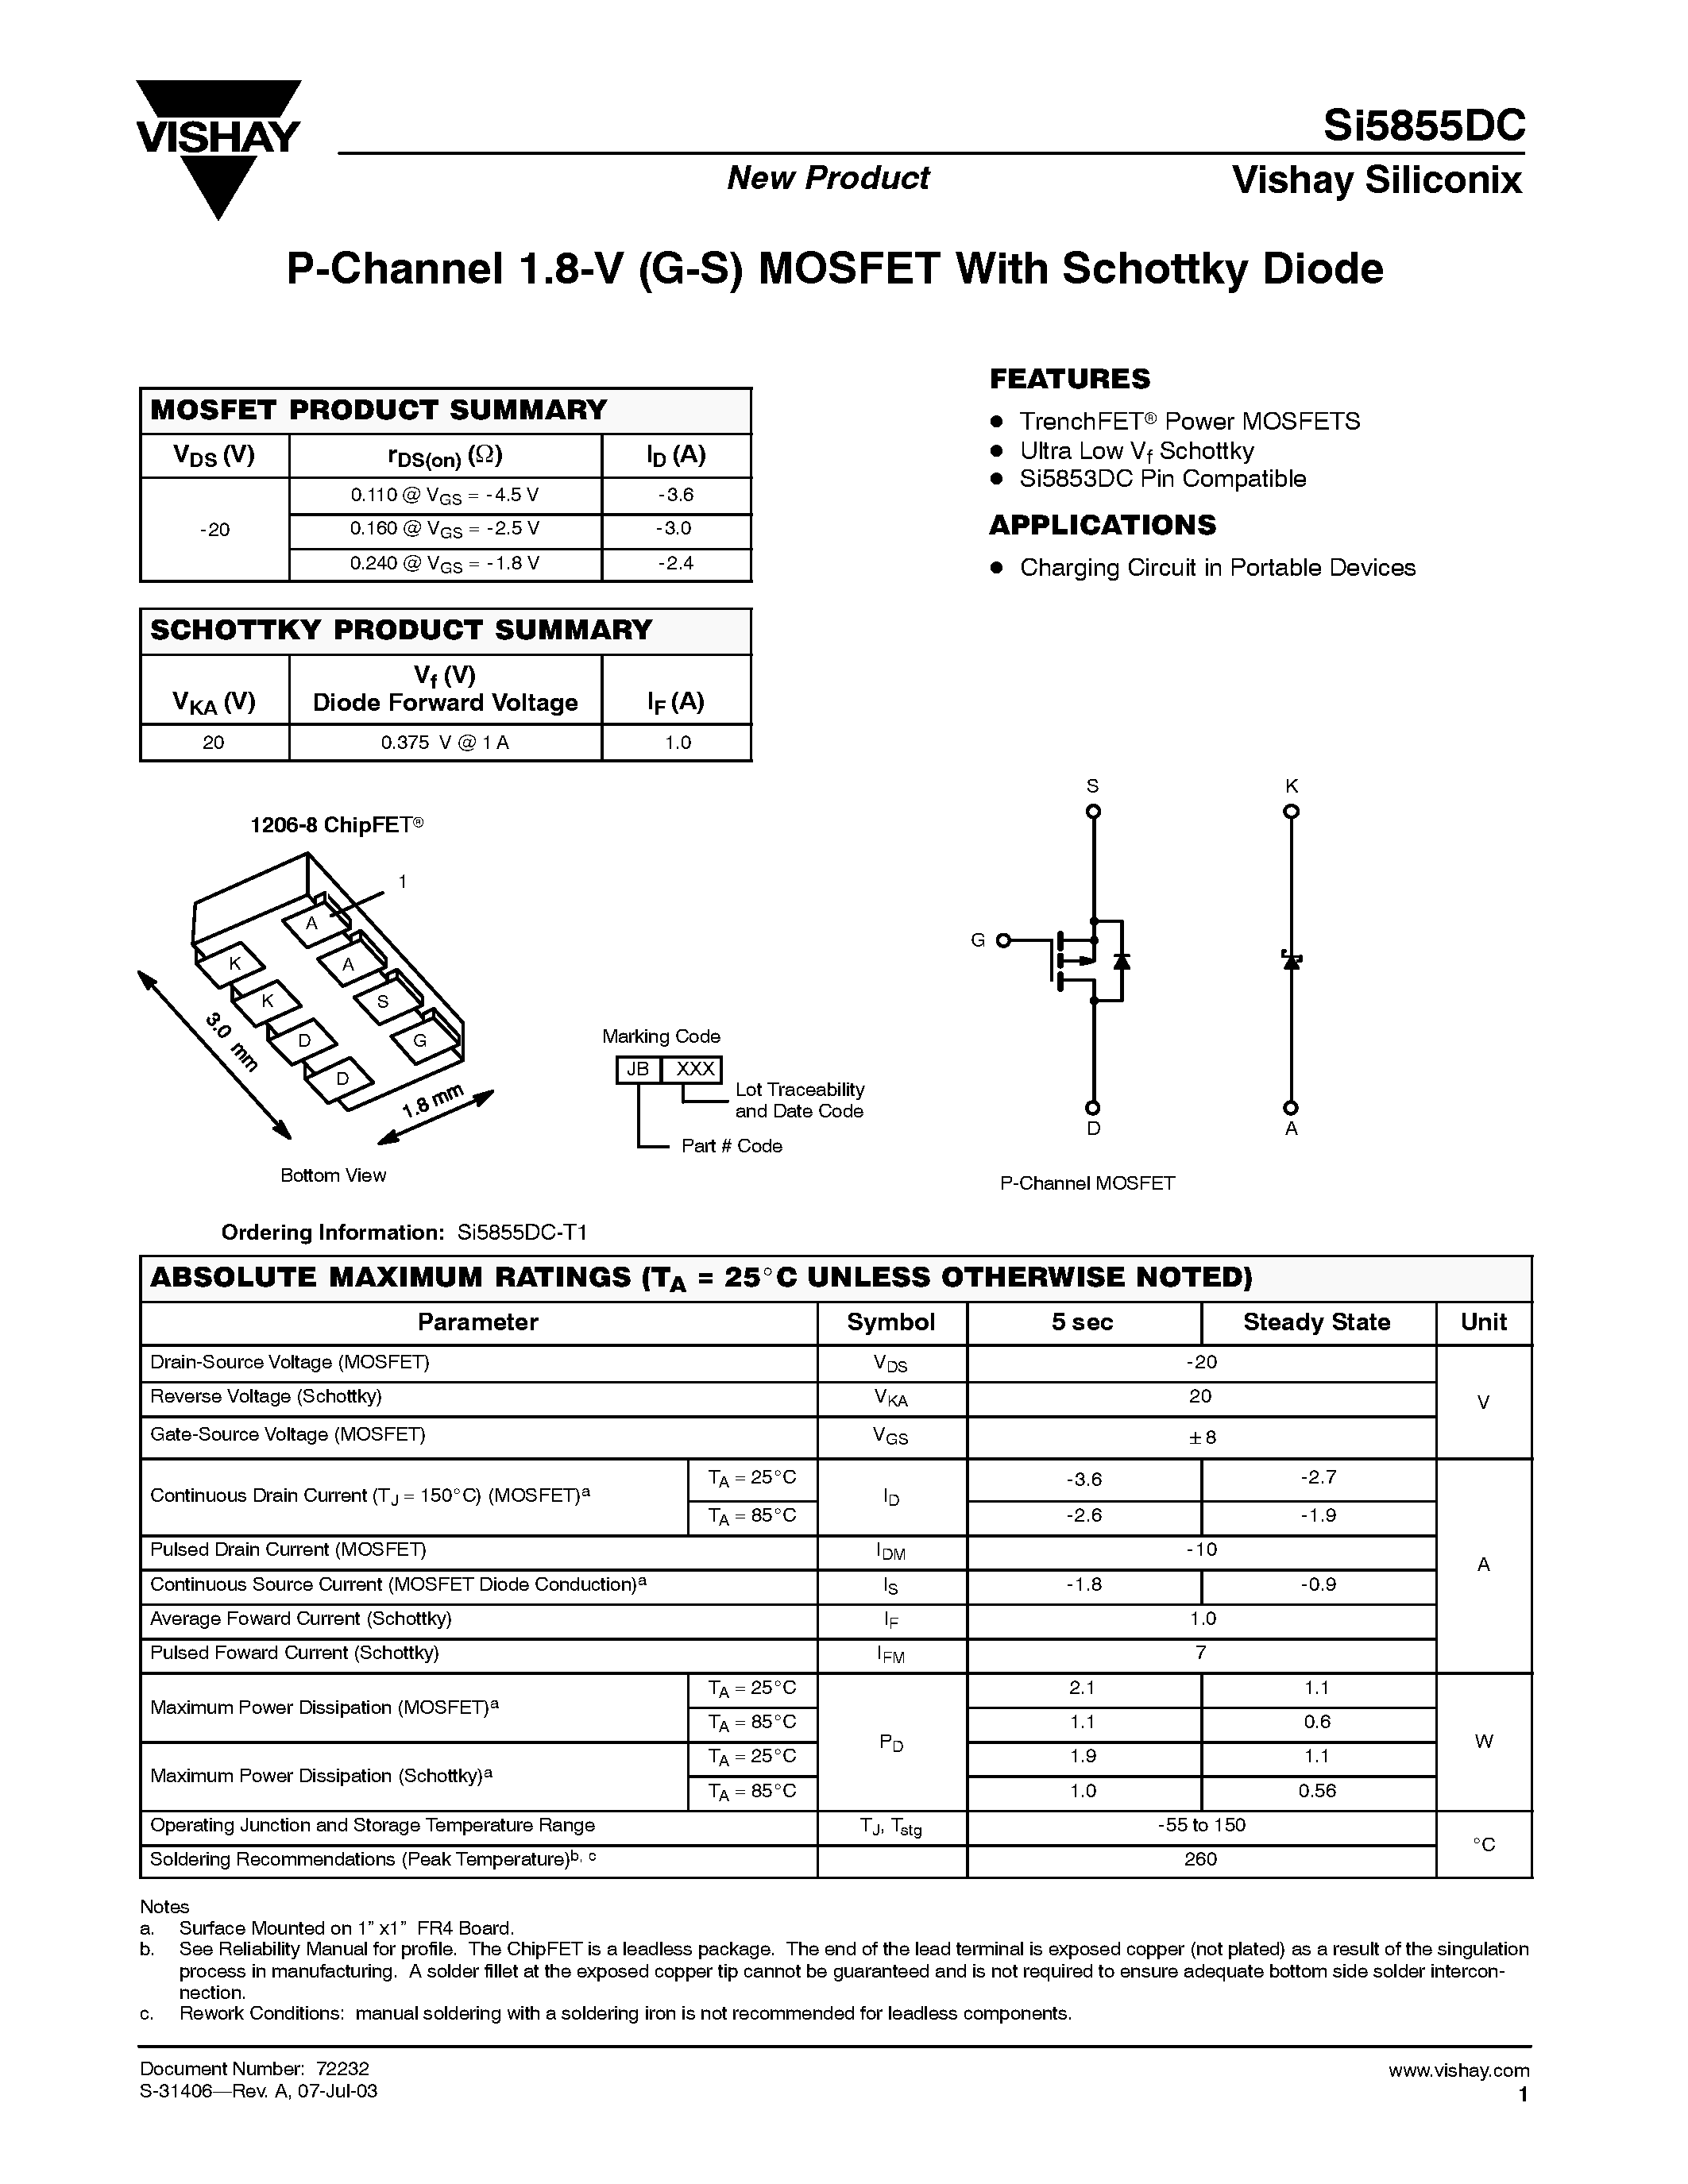 Даташит SI5855DC - P-Channel 1.8-V (G-S) MOSFET With Schottky Diode страница 1